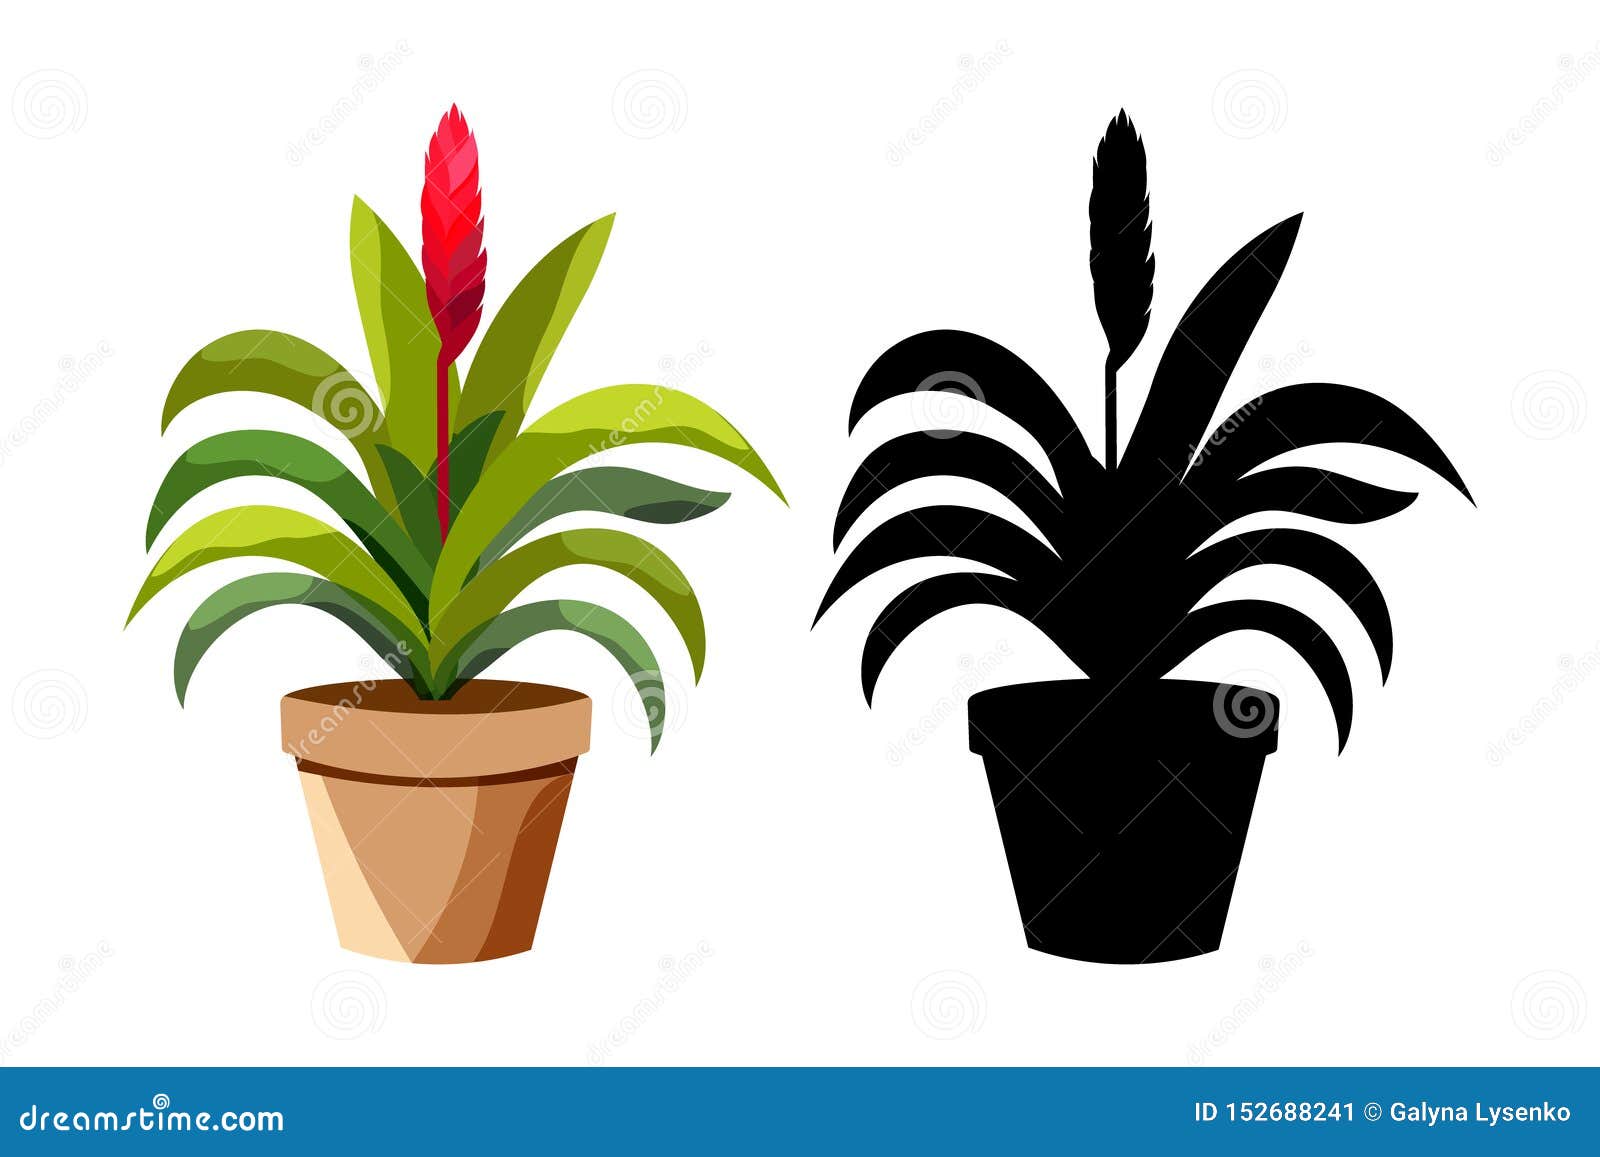 Indoor And Outdoor Landscape Garden Potted Plants Isolated